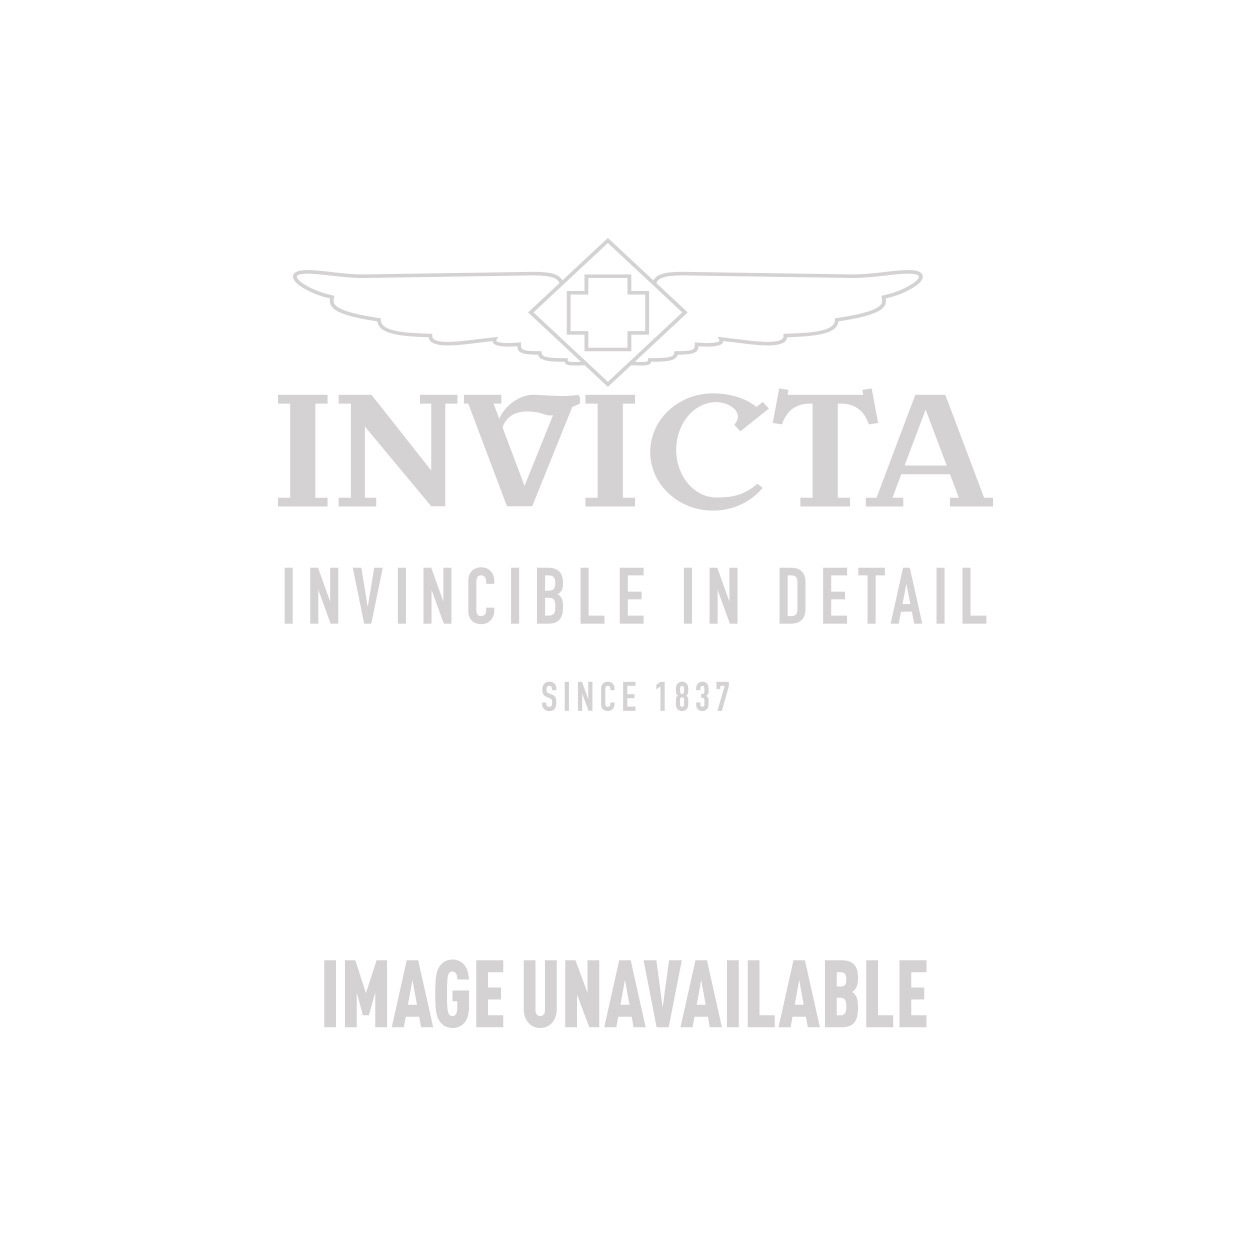 Invincible Guarantee - 100% Replacement Guarantee for Watches, Tier 9- 50-49